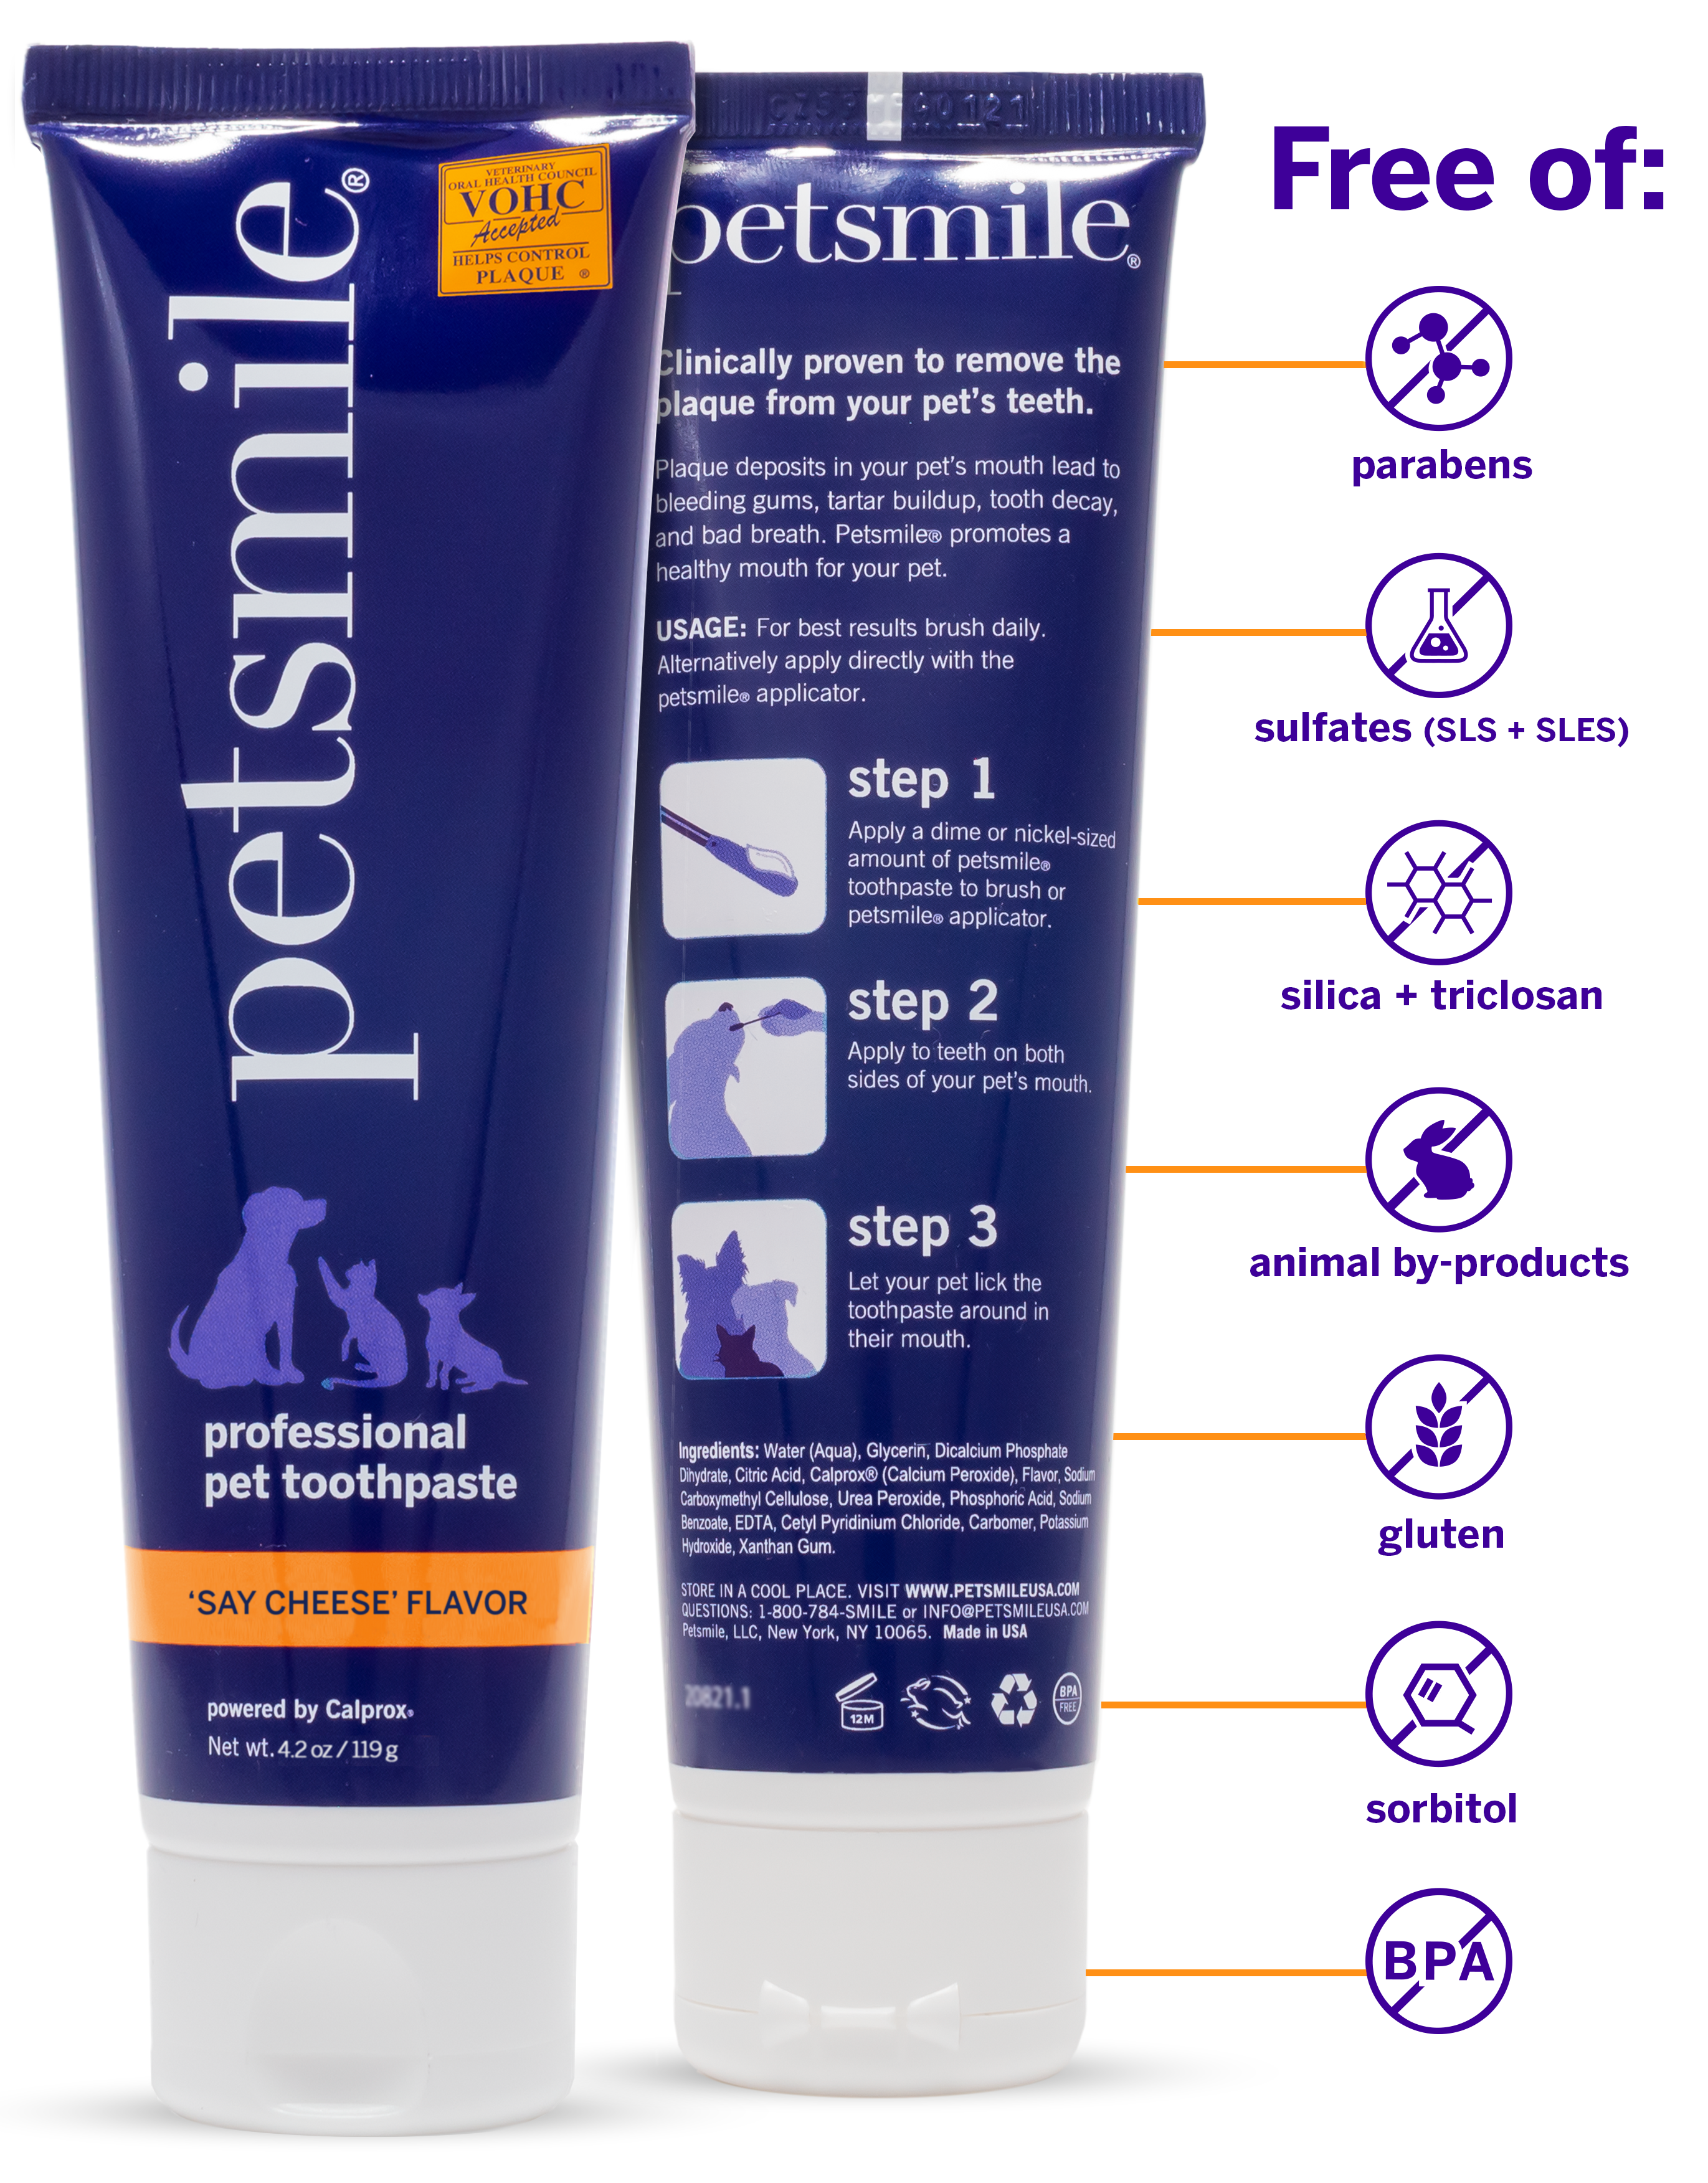 Improved dental health, fresher breath , Large tube of Say Cheese flavor , Large purple tube of petsmile toothpaste , BPA-free, vegan, VOHC certified , 2.5 OZ of Say Cheese flavor toothpaste